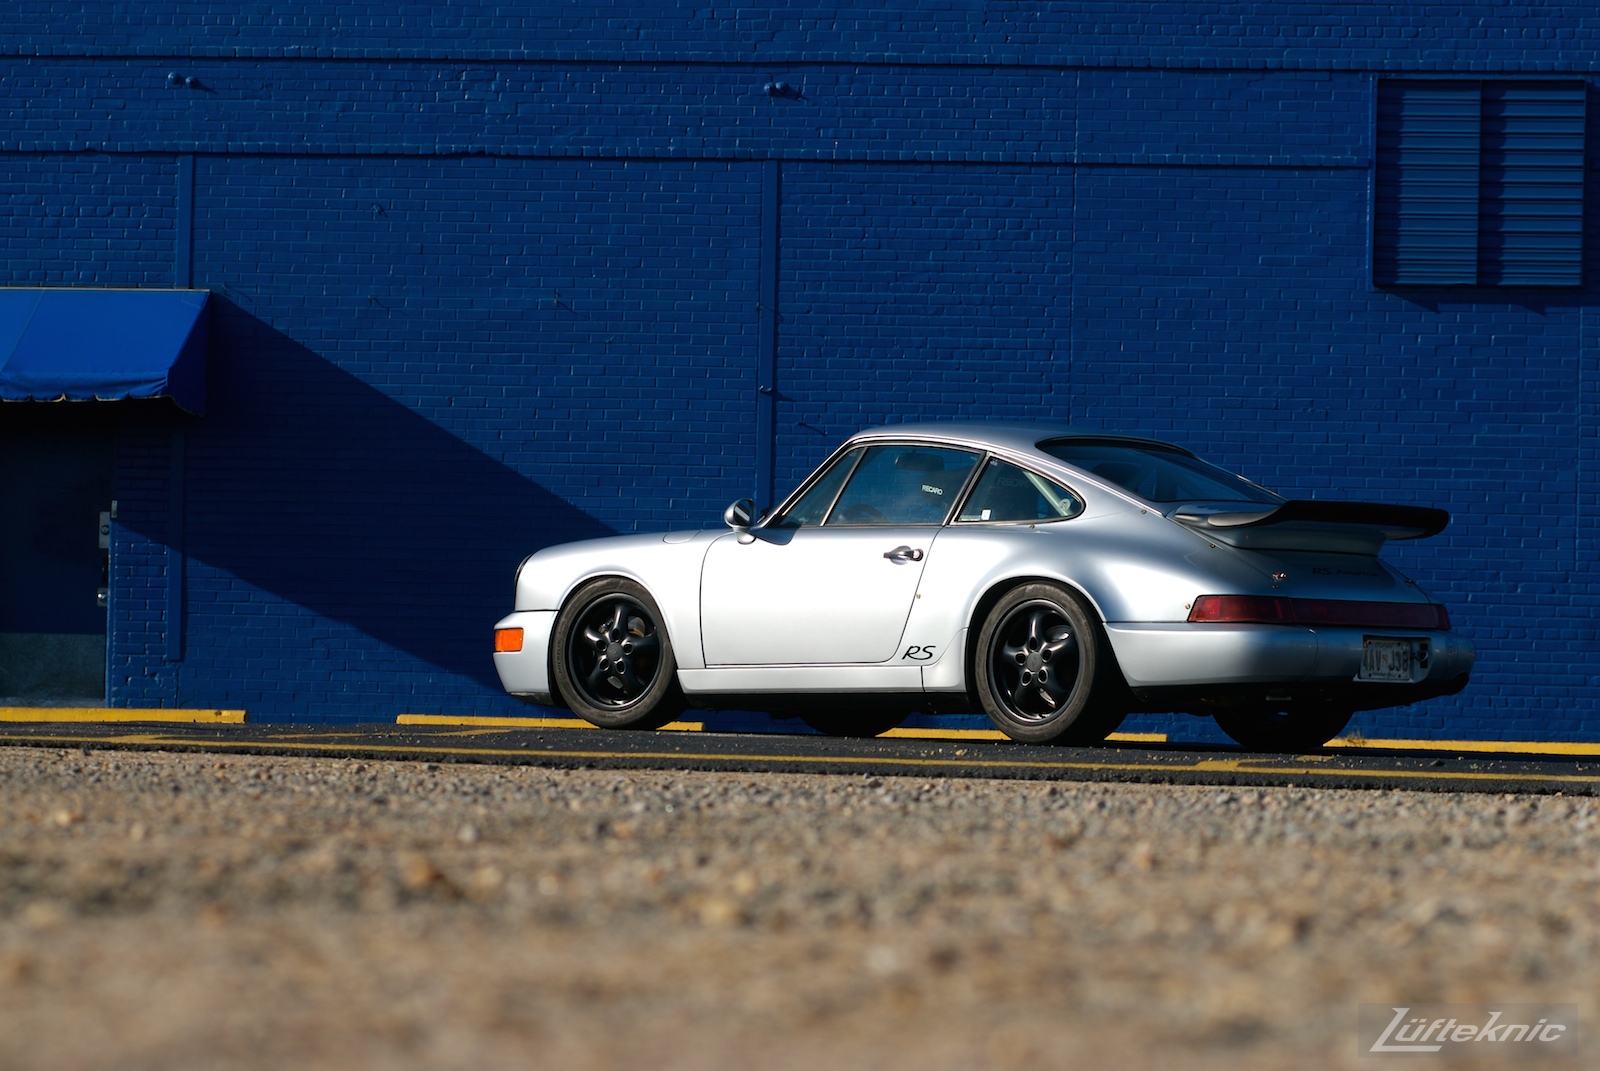 A Big blue wall with a beautiful silver Porsche 911 RS America